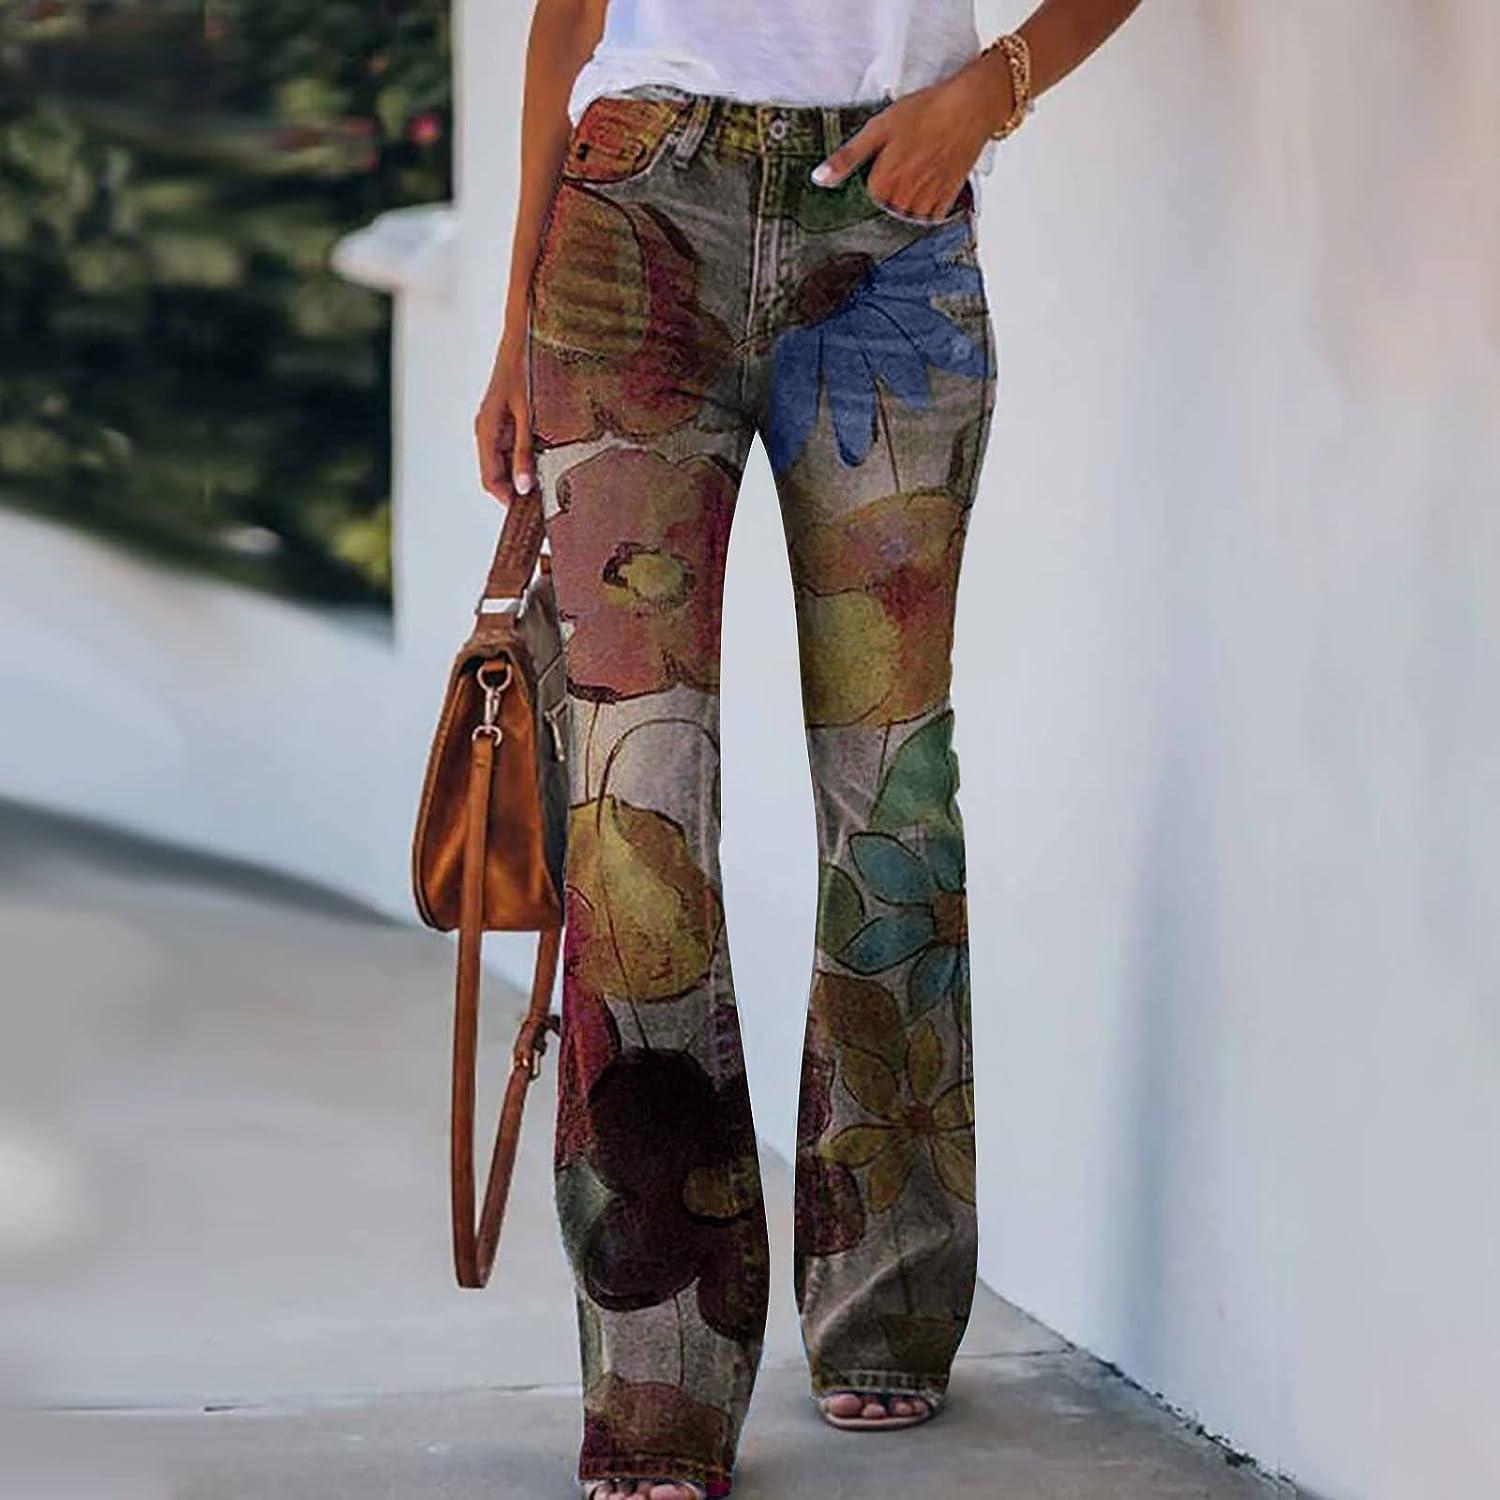 Bell Bottom Jeans for Women High Waisted Flare Jeans Floral Print